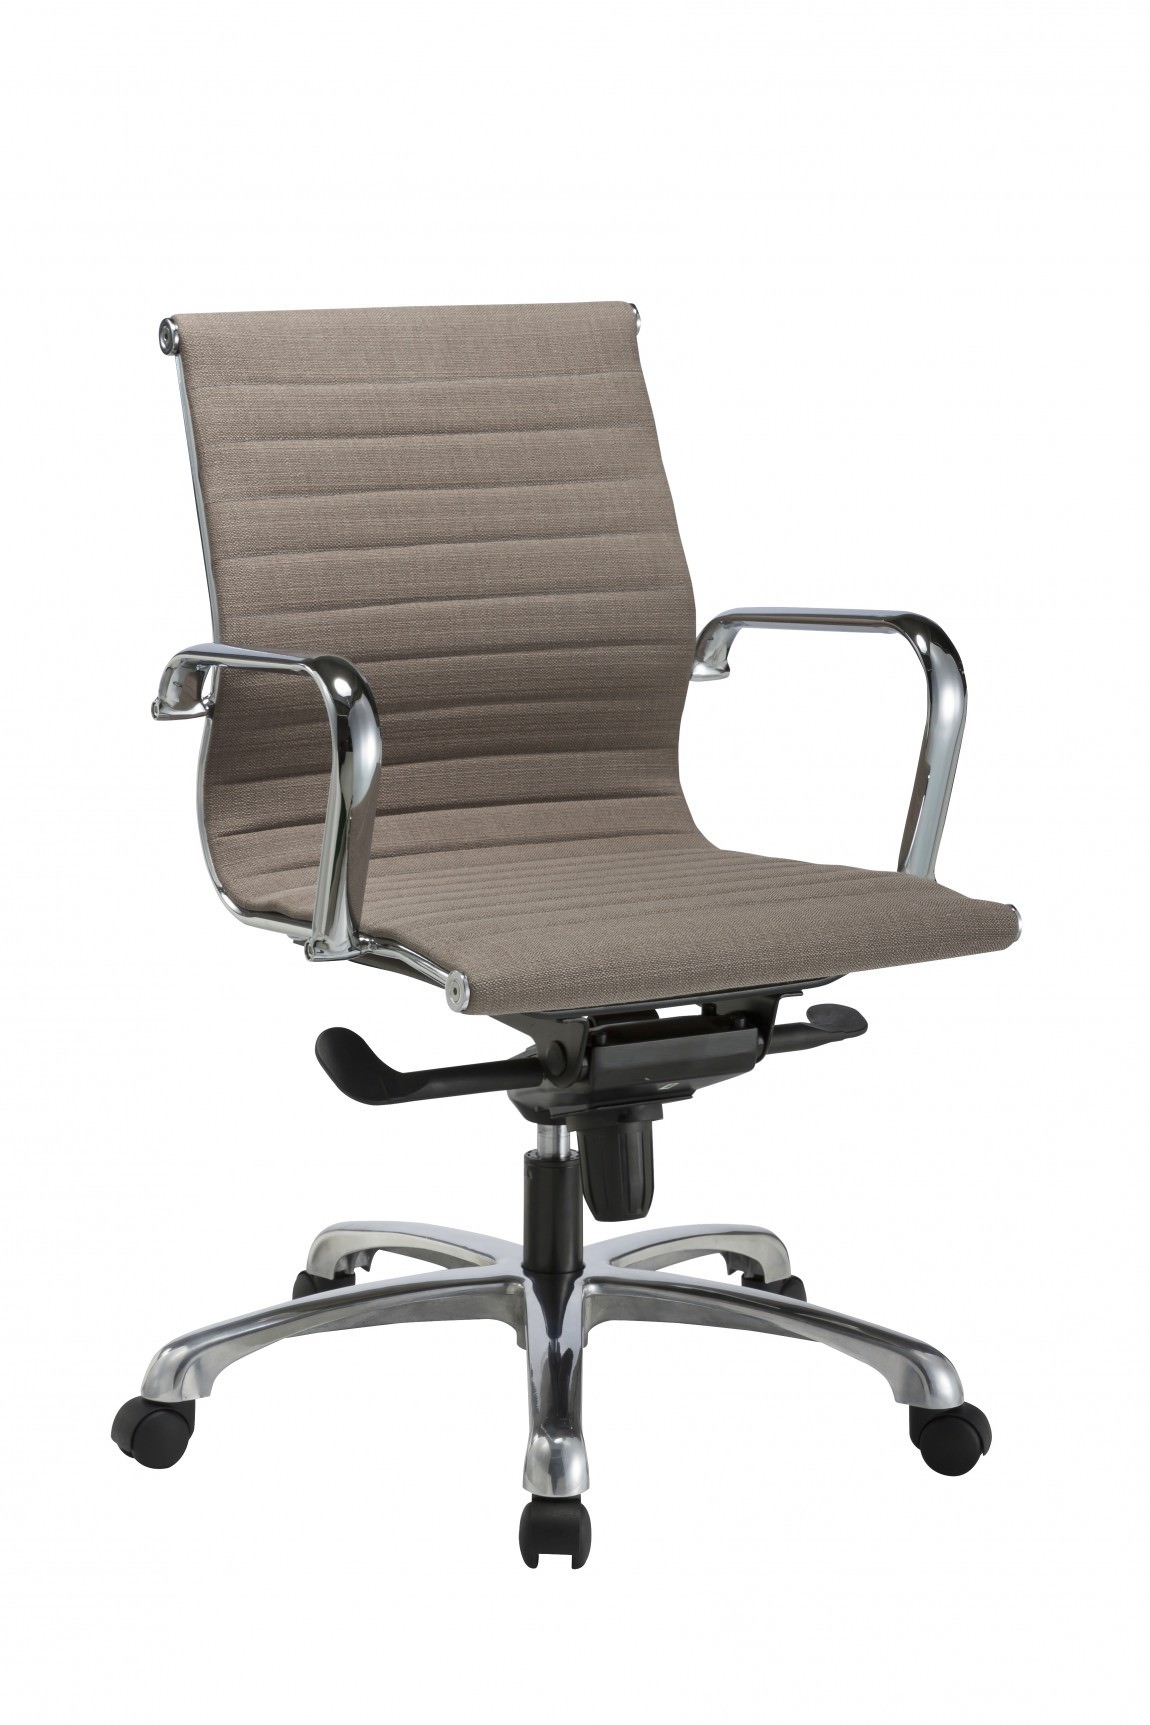 Brown Mid Back Office and Conference Room Chair with Arms